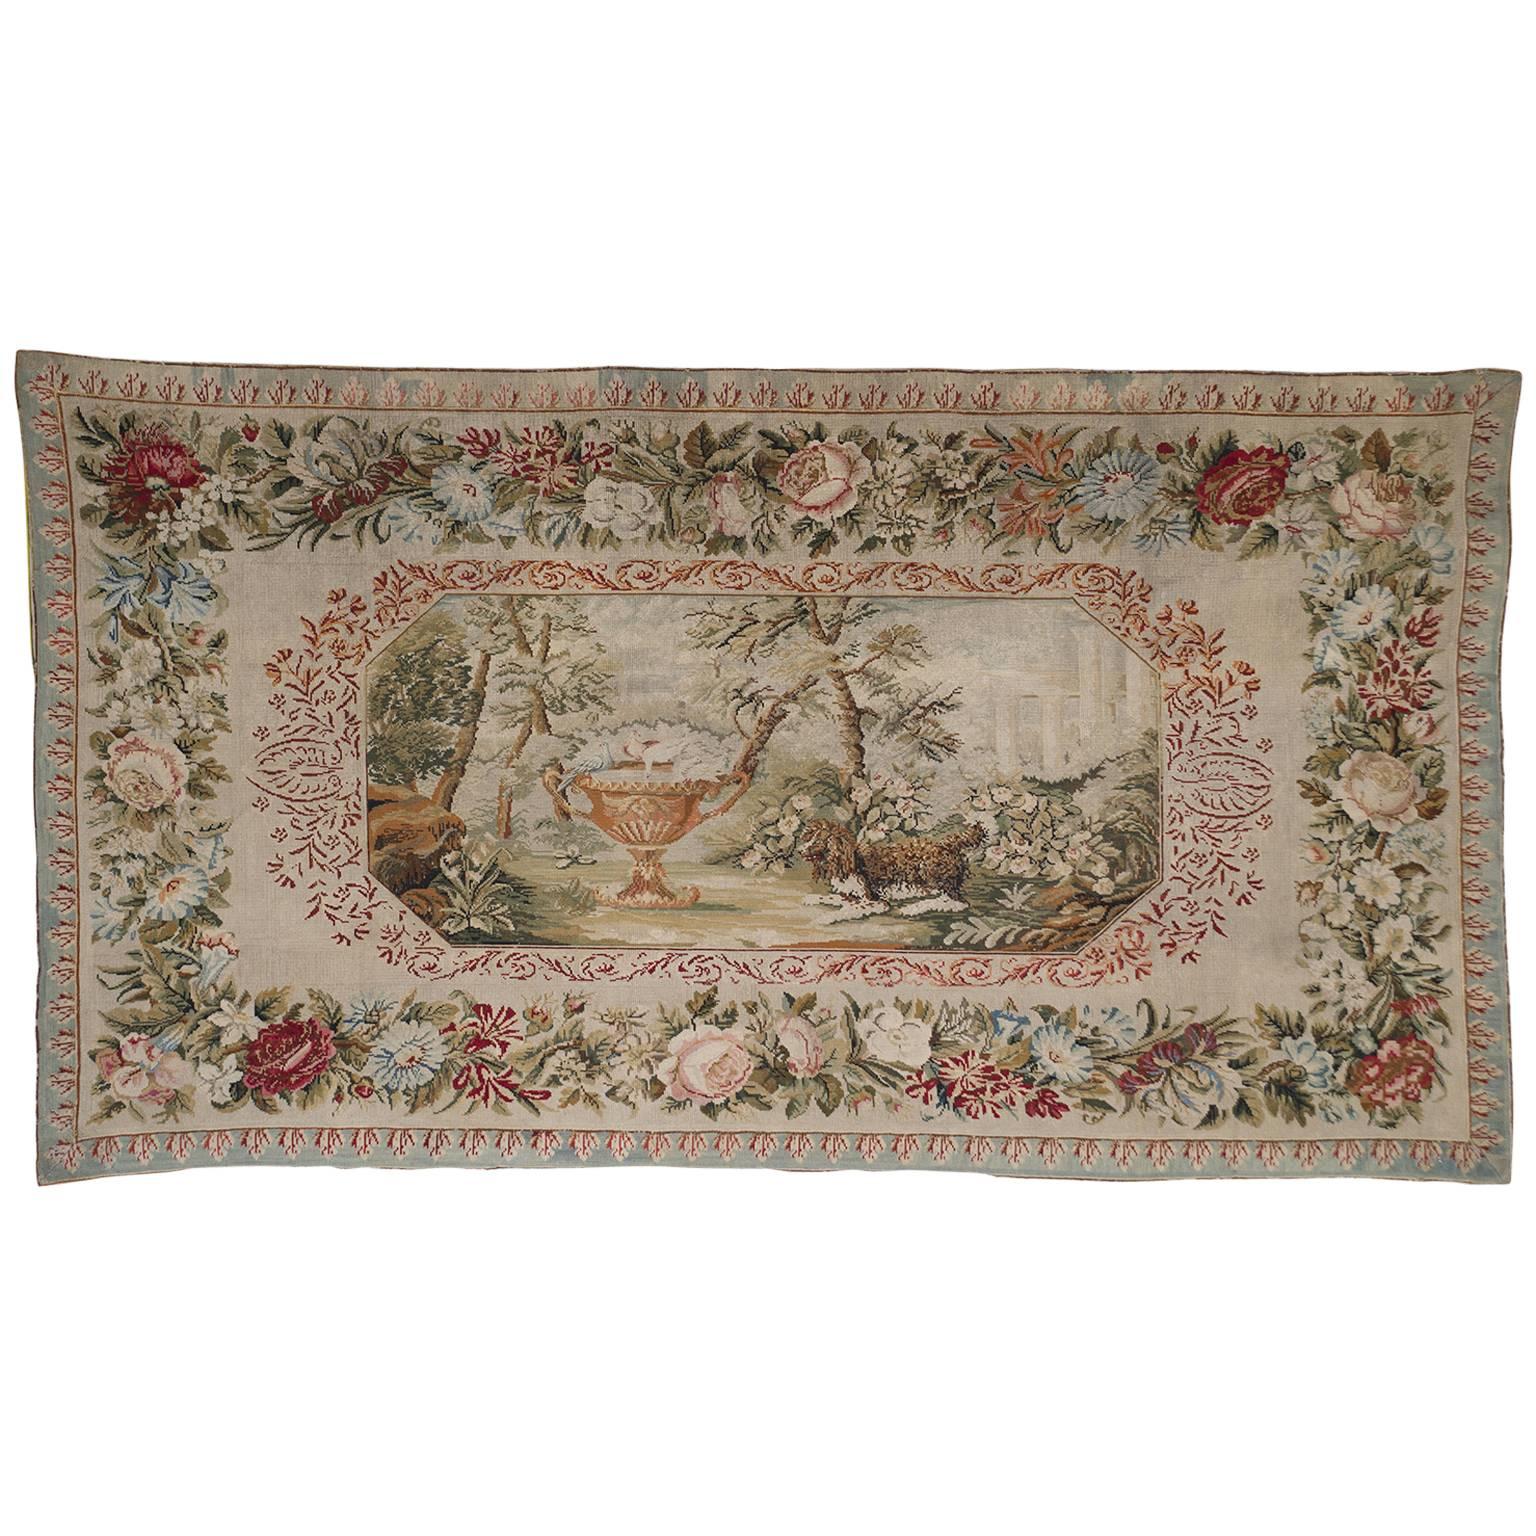 19th Century European Needlepoint Tapestry For Sale